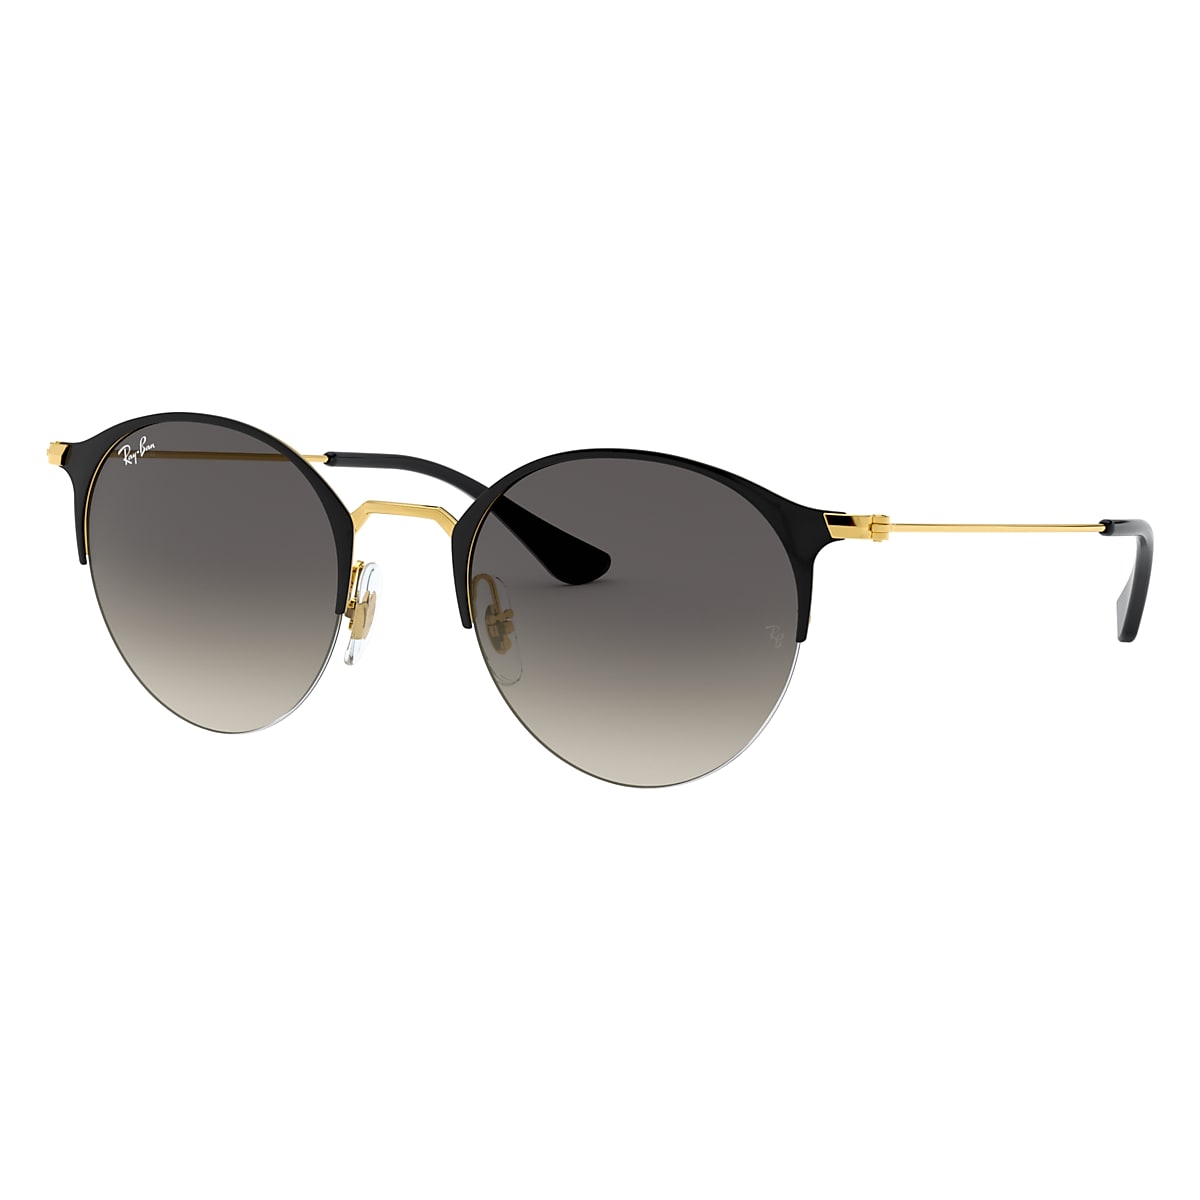 RB3578 Sunglasses in Black On Gold and Grey - RB3578 | Ray-Ban 